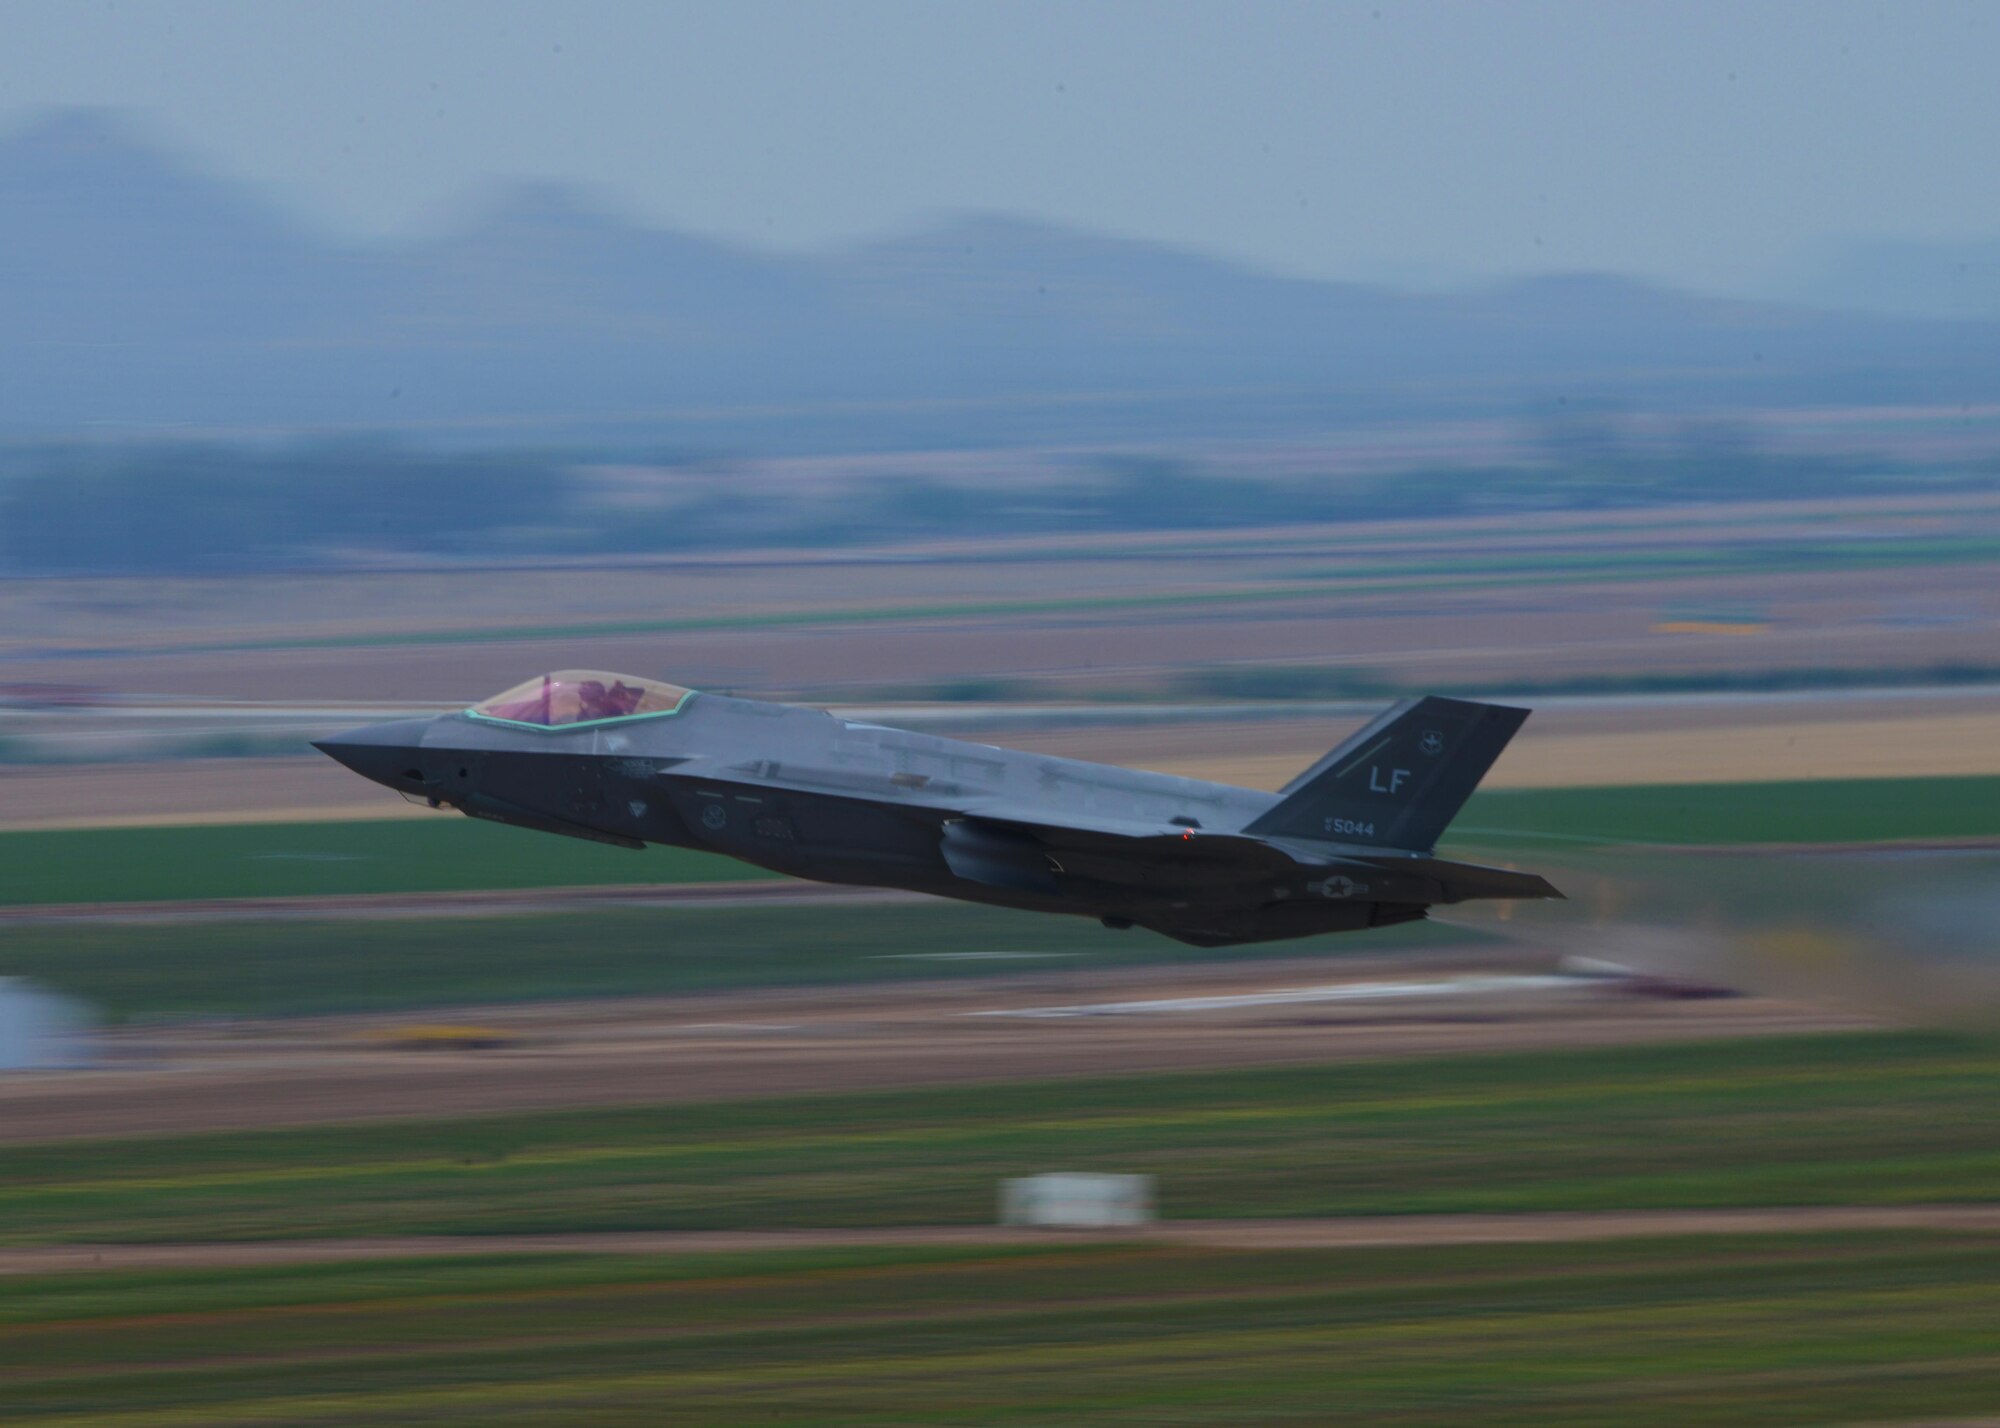 A 56th Fighter Wing F-35A Lightning II pilot takes off from Luke Air Force Base, Ariz., July 17, 2017. F-35 pilots faced off against F-16 Fighting Falcons during a capstone flight exercise as part of the first F-35 basic course at Luke. (U.S. Air Force photo/Airman 1st Class Caleb Worpel)